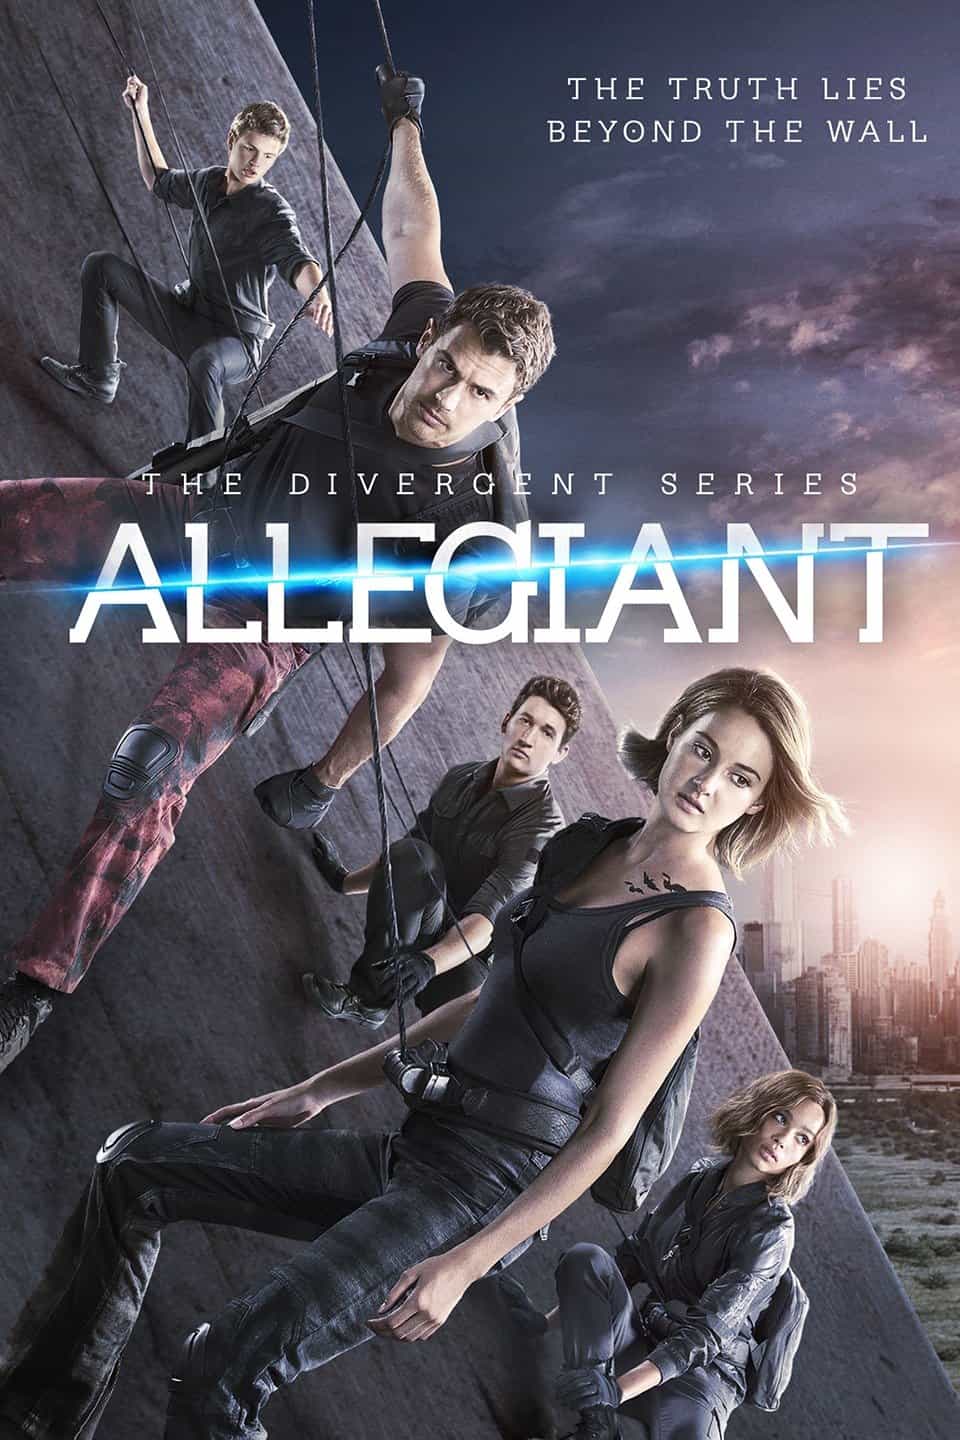 UK Video Chart Weekending 17 July 2016: Allegiant makes its debut at the top